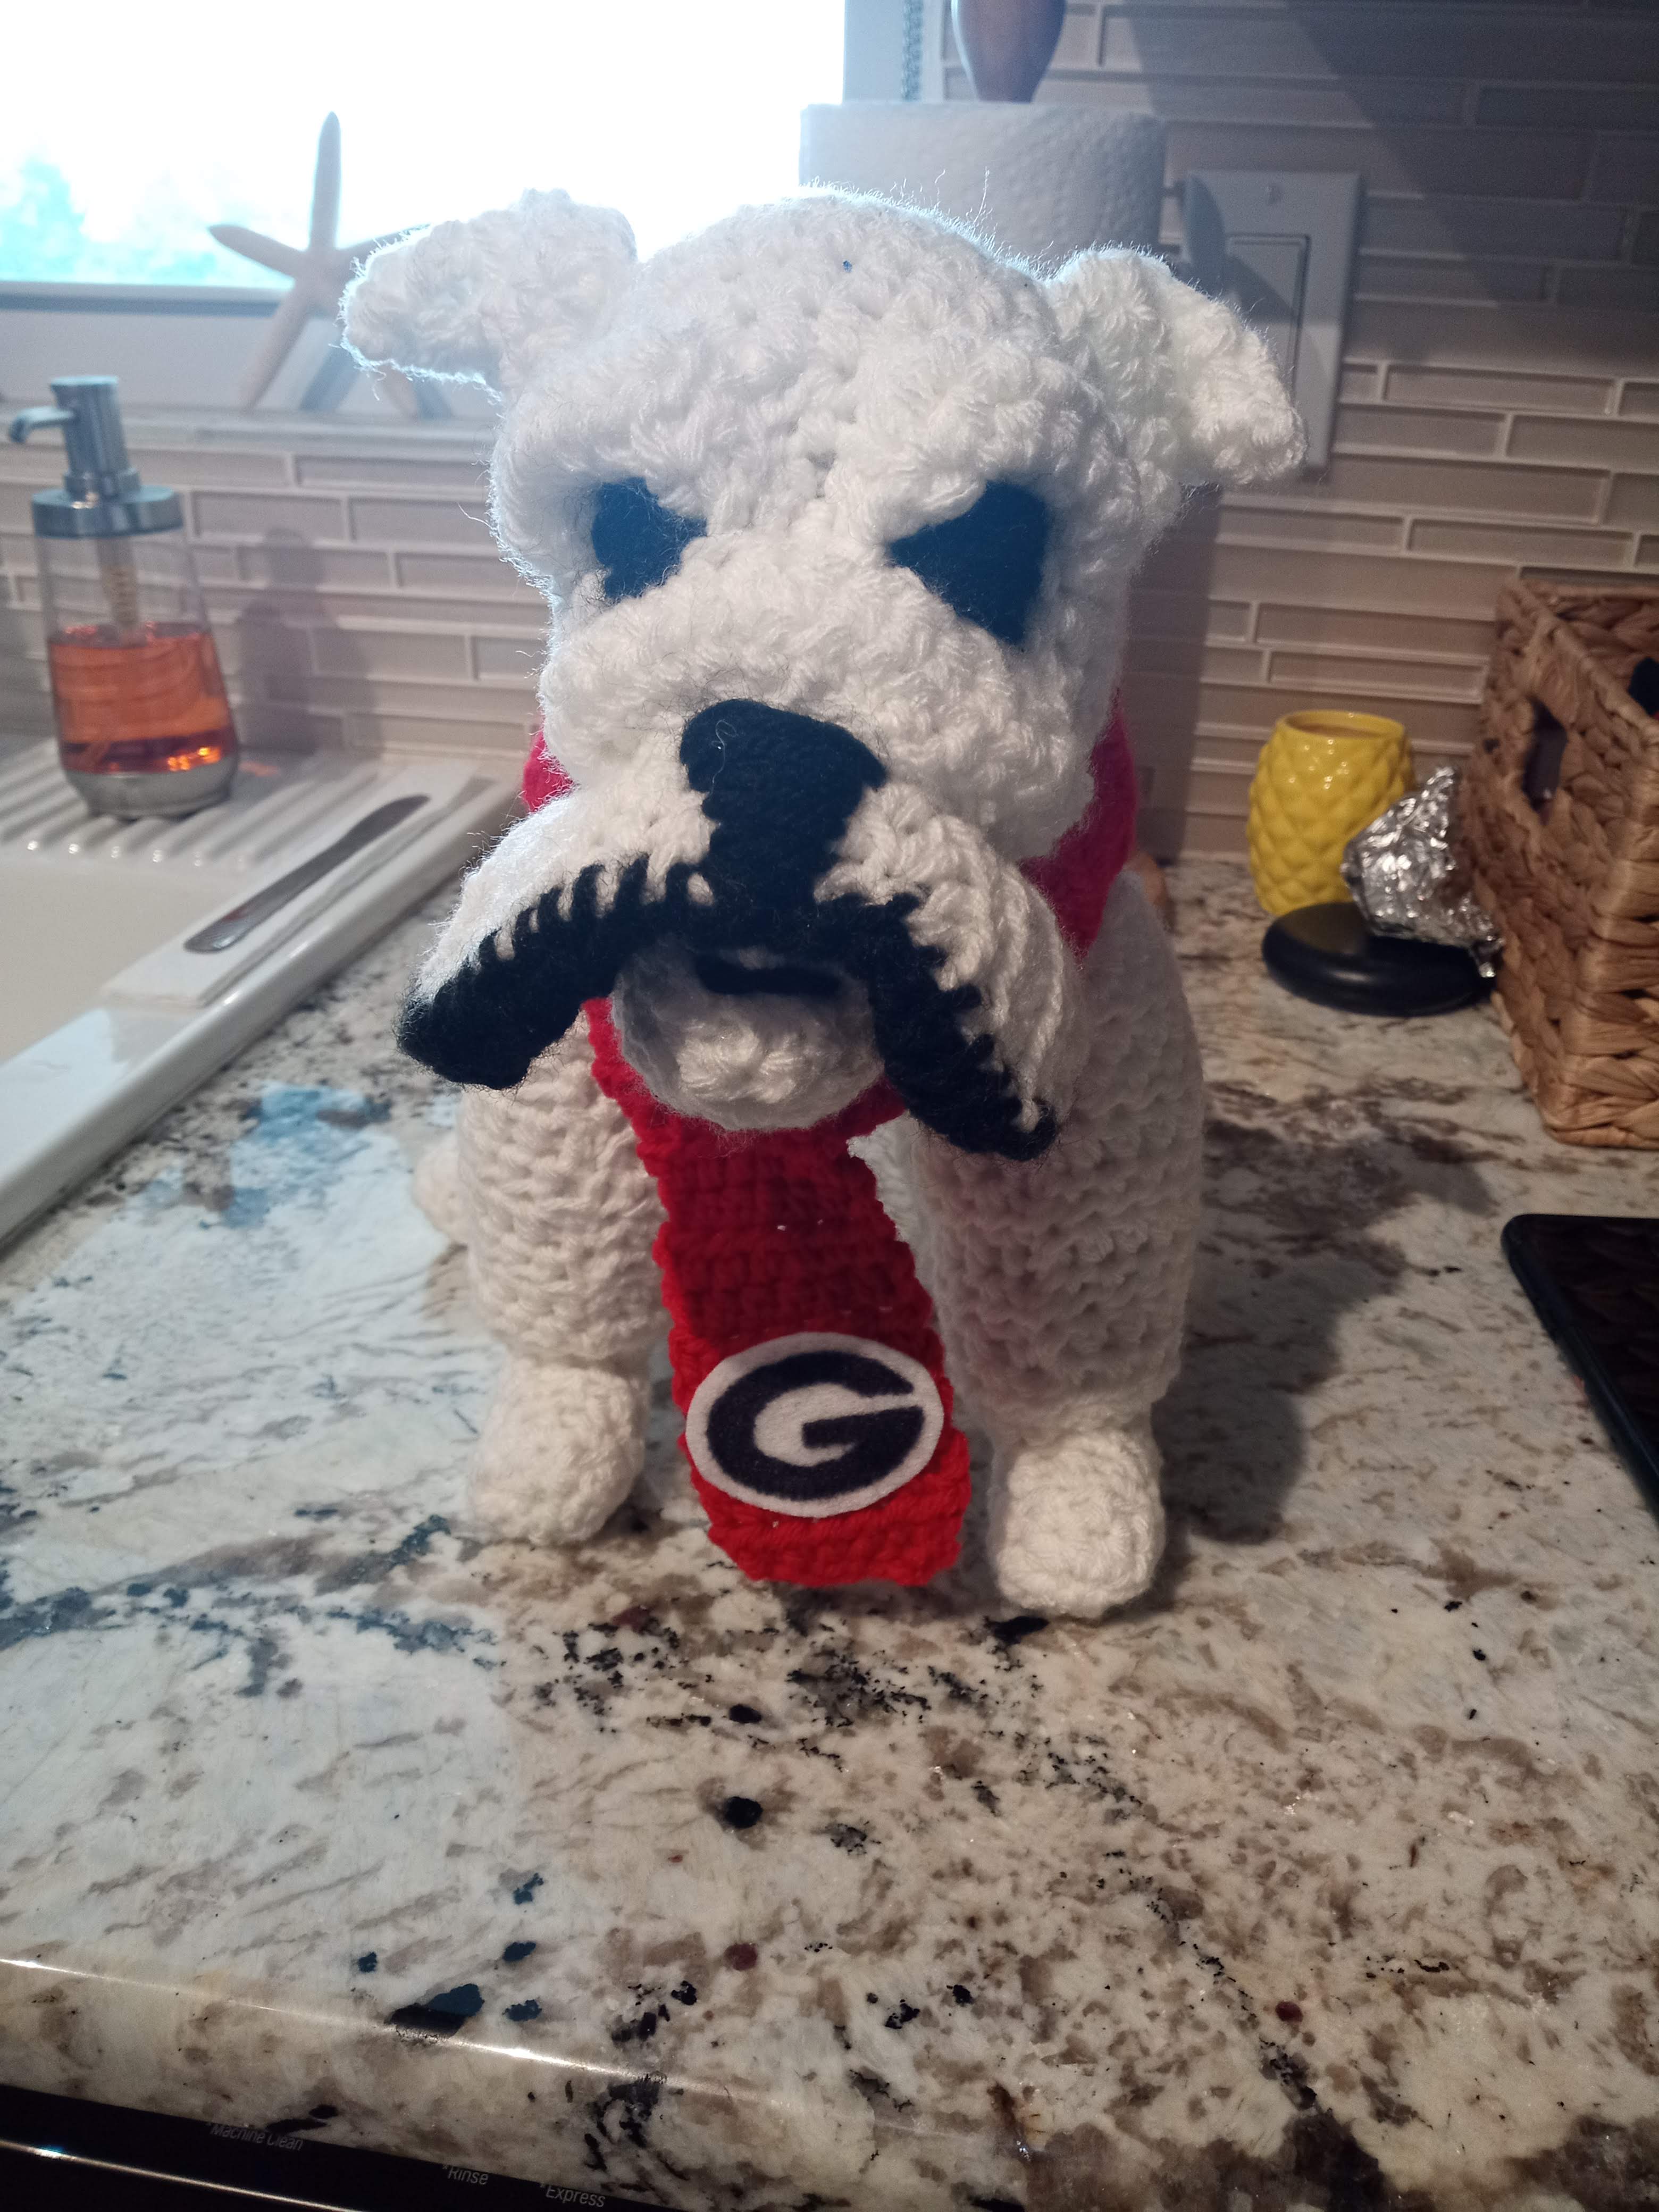 a crocheted white bulldog with black eyes and a red scarf with a Georgia University logo on the end standing on a marble kitchen counter next to a sink